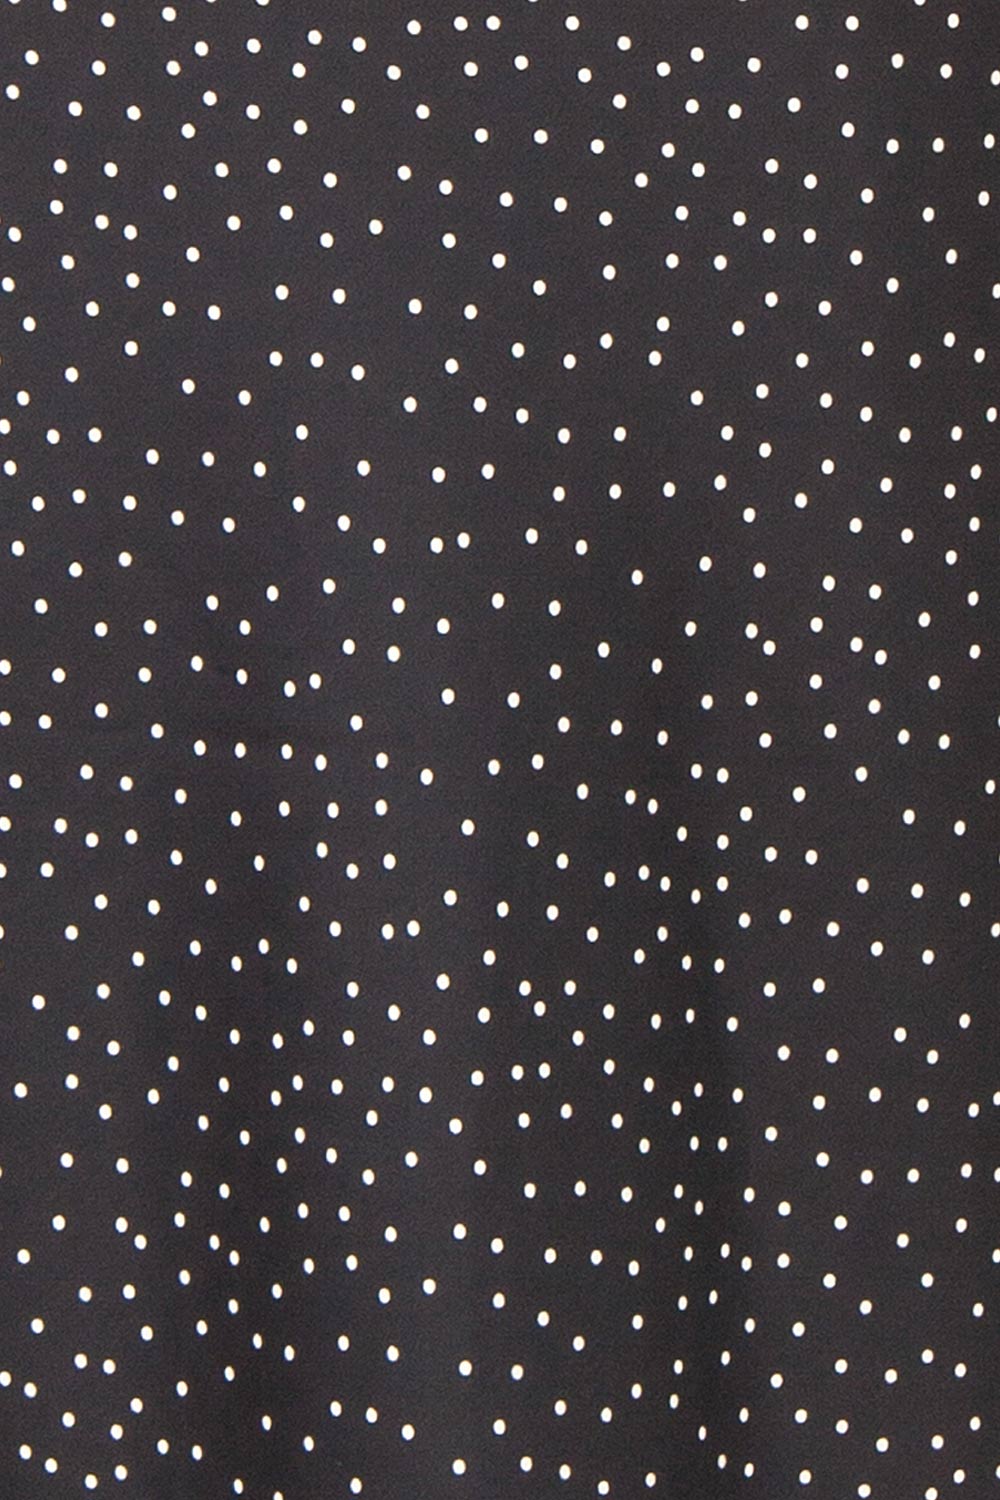 Rebby Polka Dot Black Silky Fitted Midi Dress | Boutique 1861 fabric